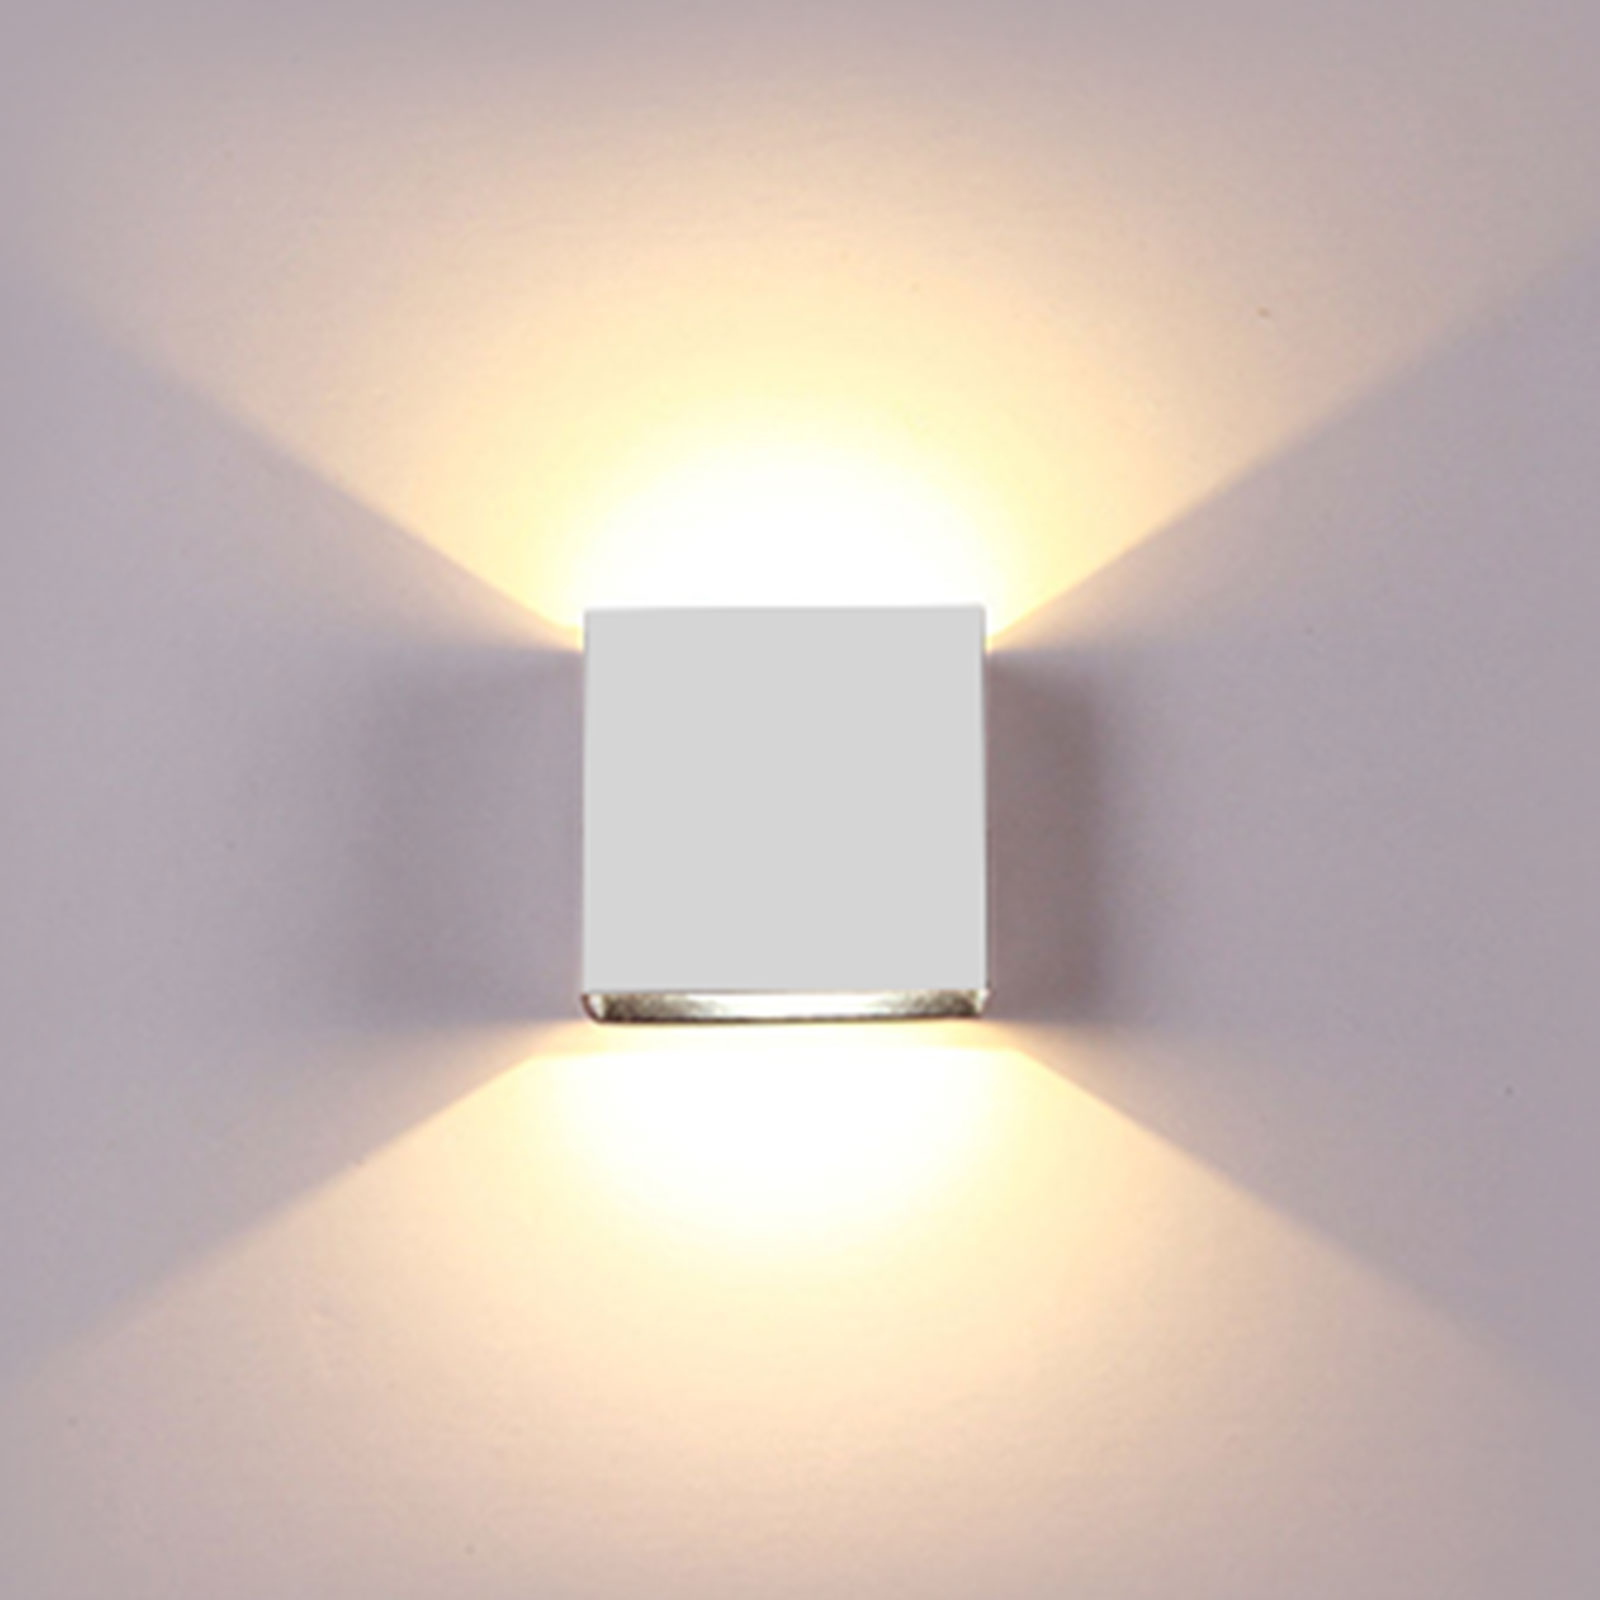 Modern LED Wall lights Cube Sconce Fixtures Lighting Indoor Outdoor Decor RLM953